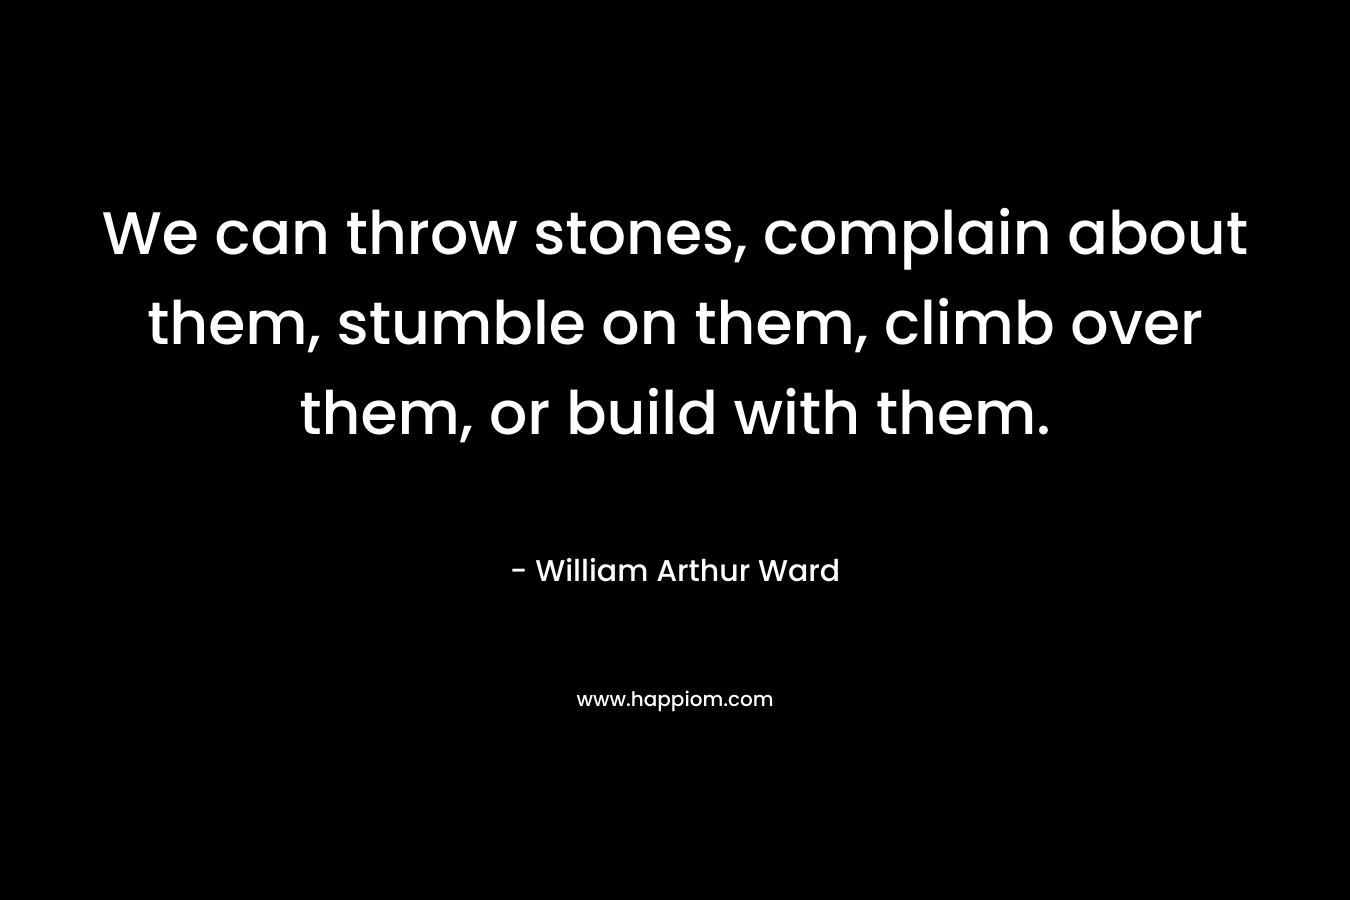 We can throw stones, complain about them, stumble on them, climb over them, or build with them.